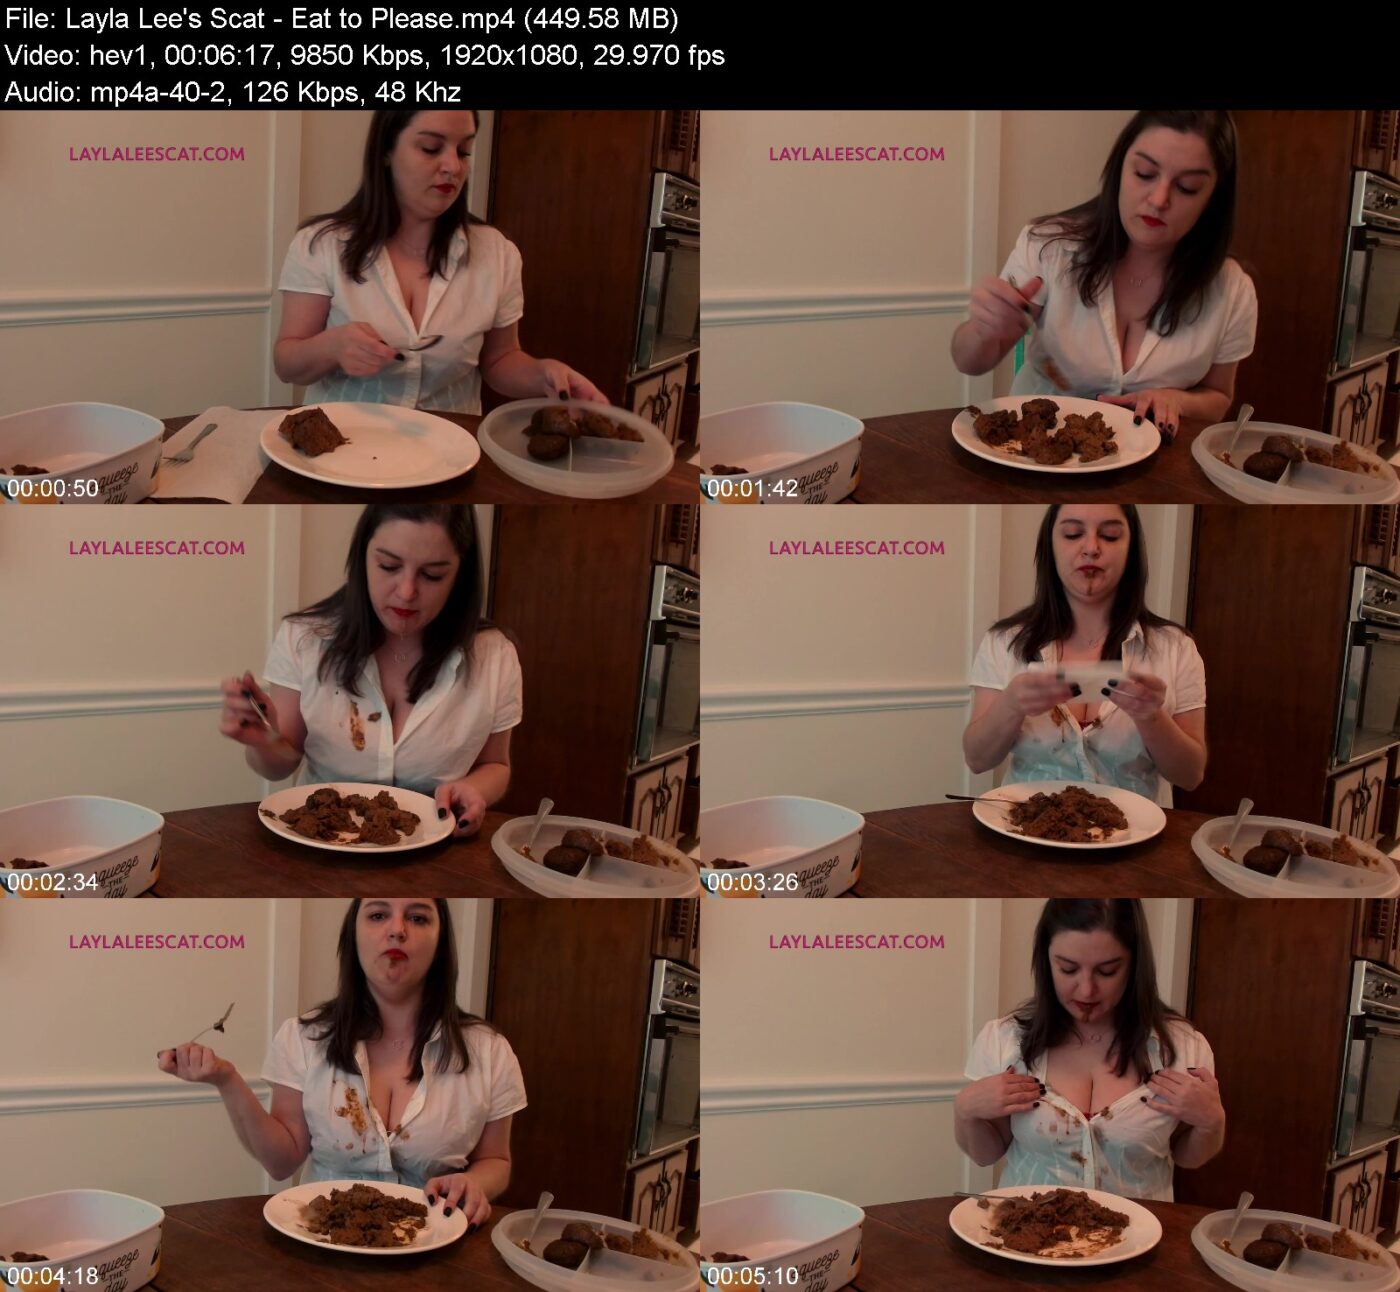 Actress: Layla Lee’s Scat. Title and Studio: Eat to Please